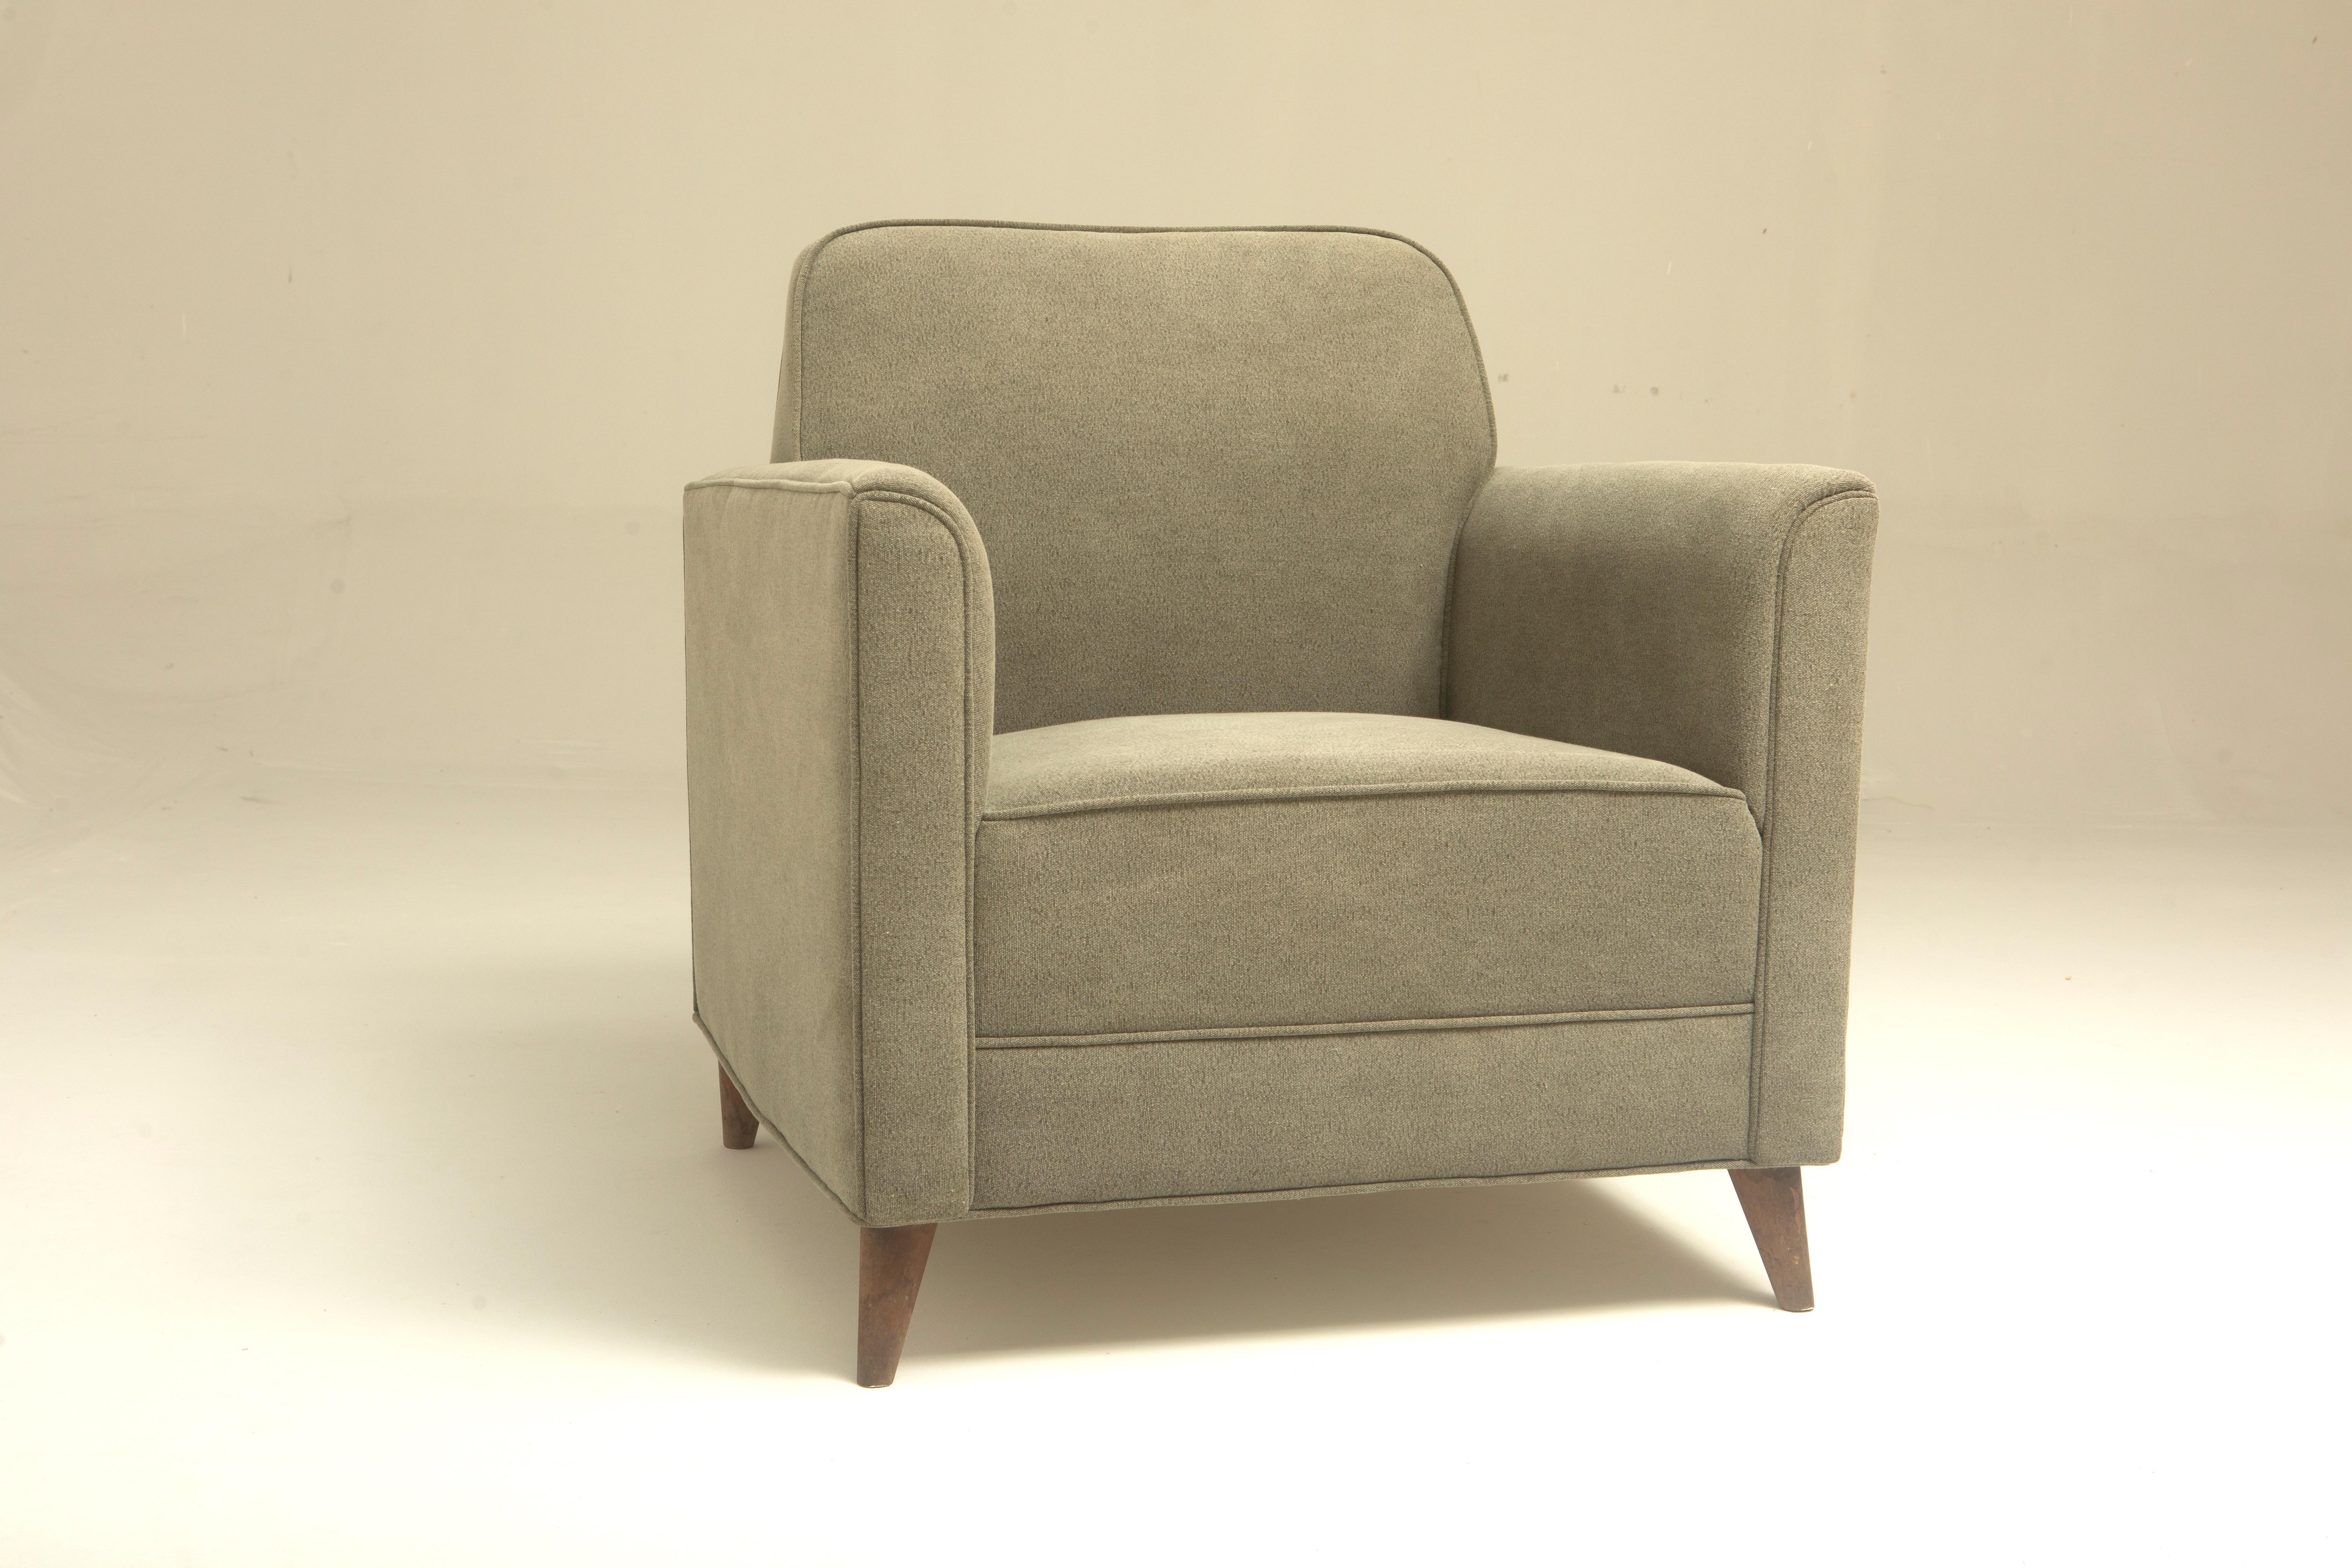 Mid-Century Modern Armchair by Brazilian Designer, 1970s

Armchair with solid wood legs, made by an unattributed Brazilian designer, circa 1970.